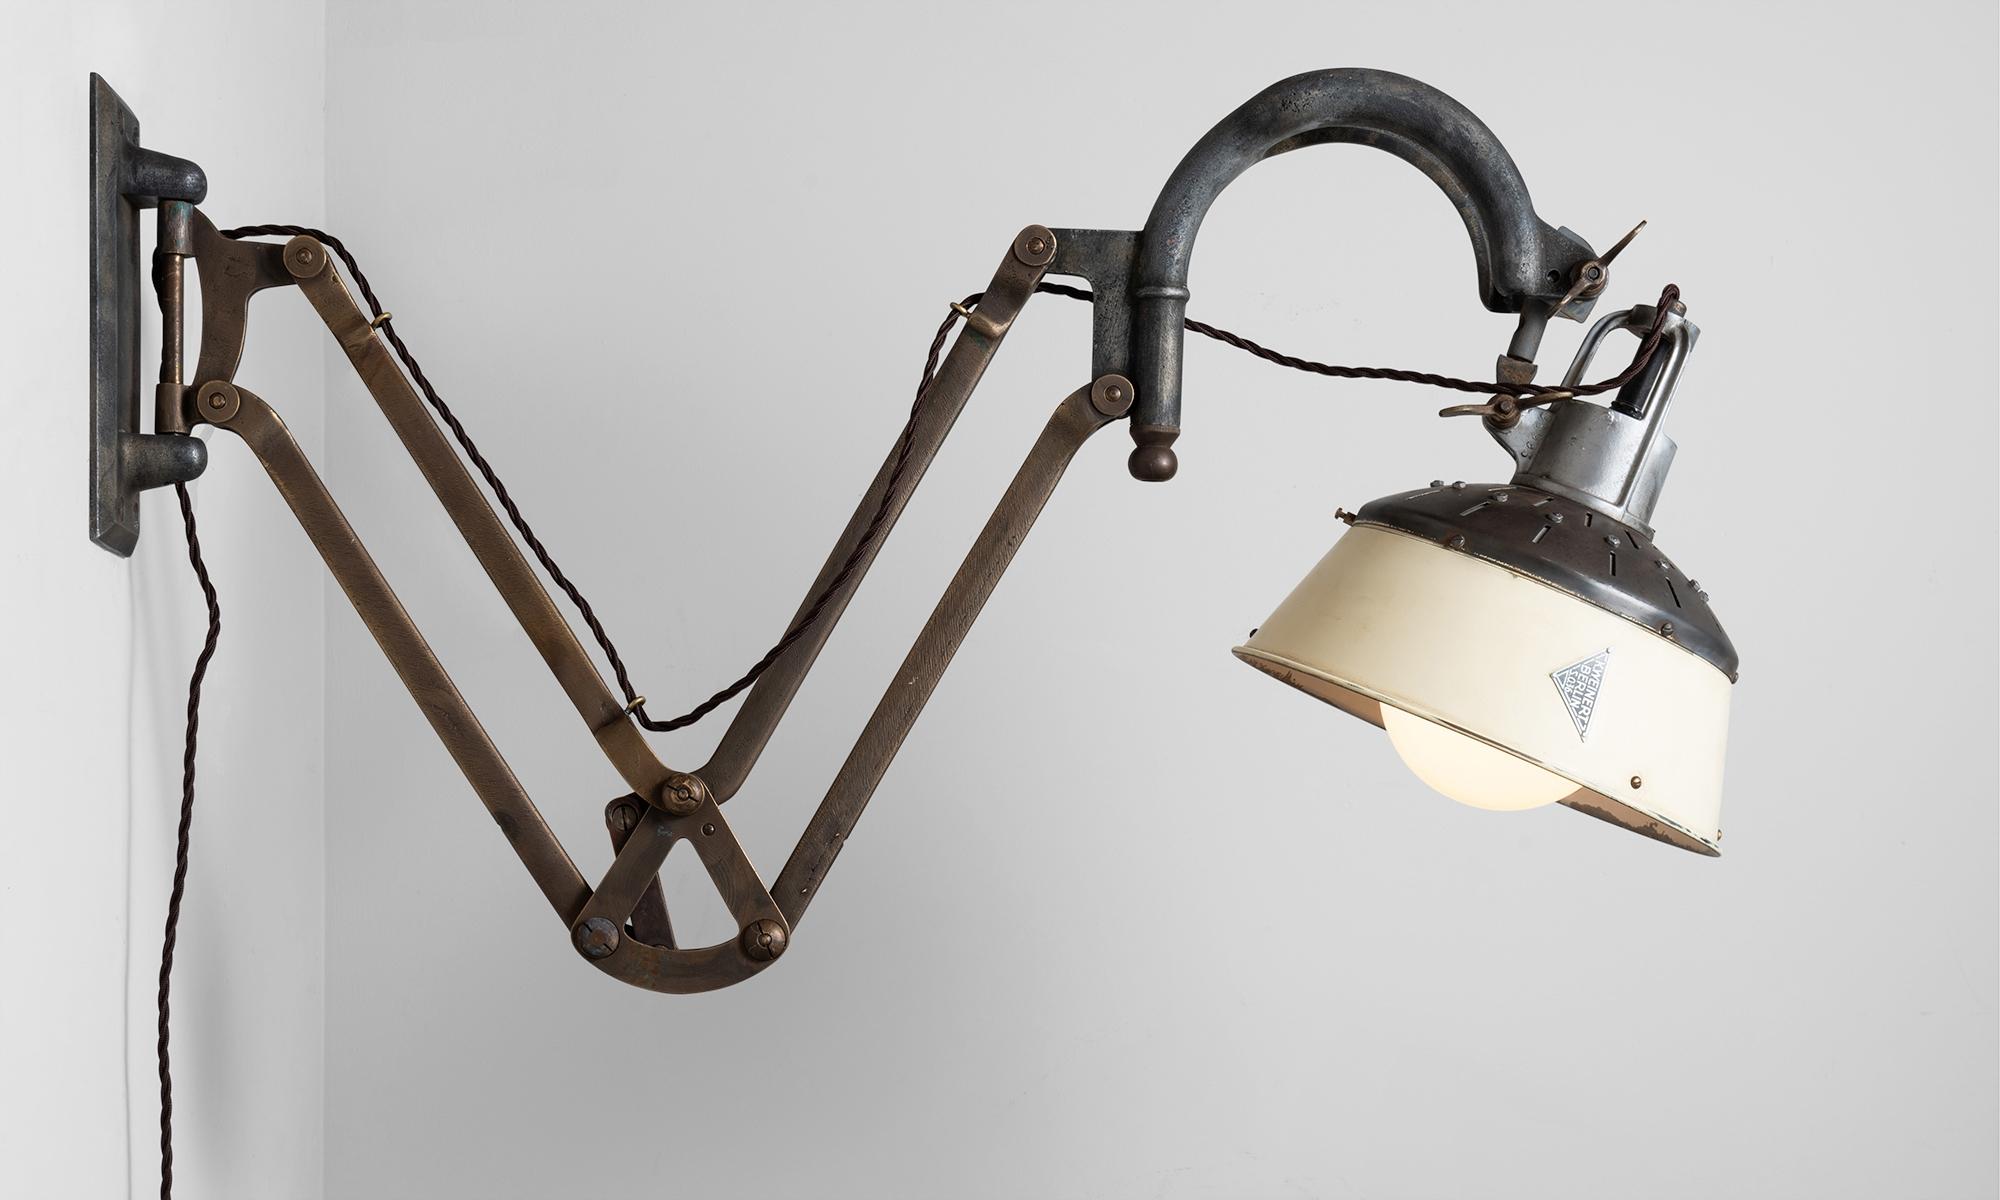 Unique wall lamp with brass and steel arm that pivots side to side as well as up and down. Lamp shade has original K. Weinert makers mark, and internal mercury glass refelctory.